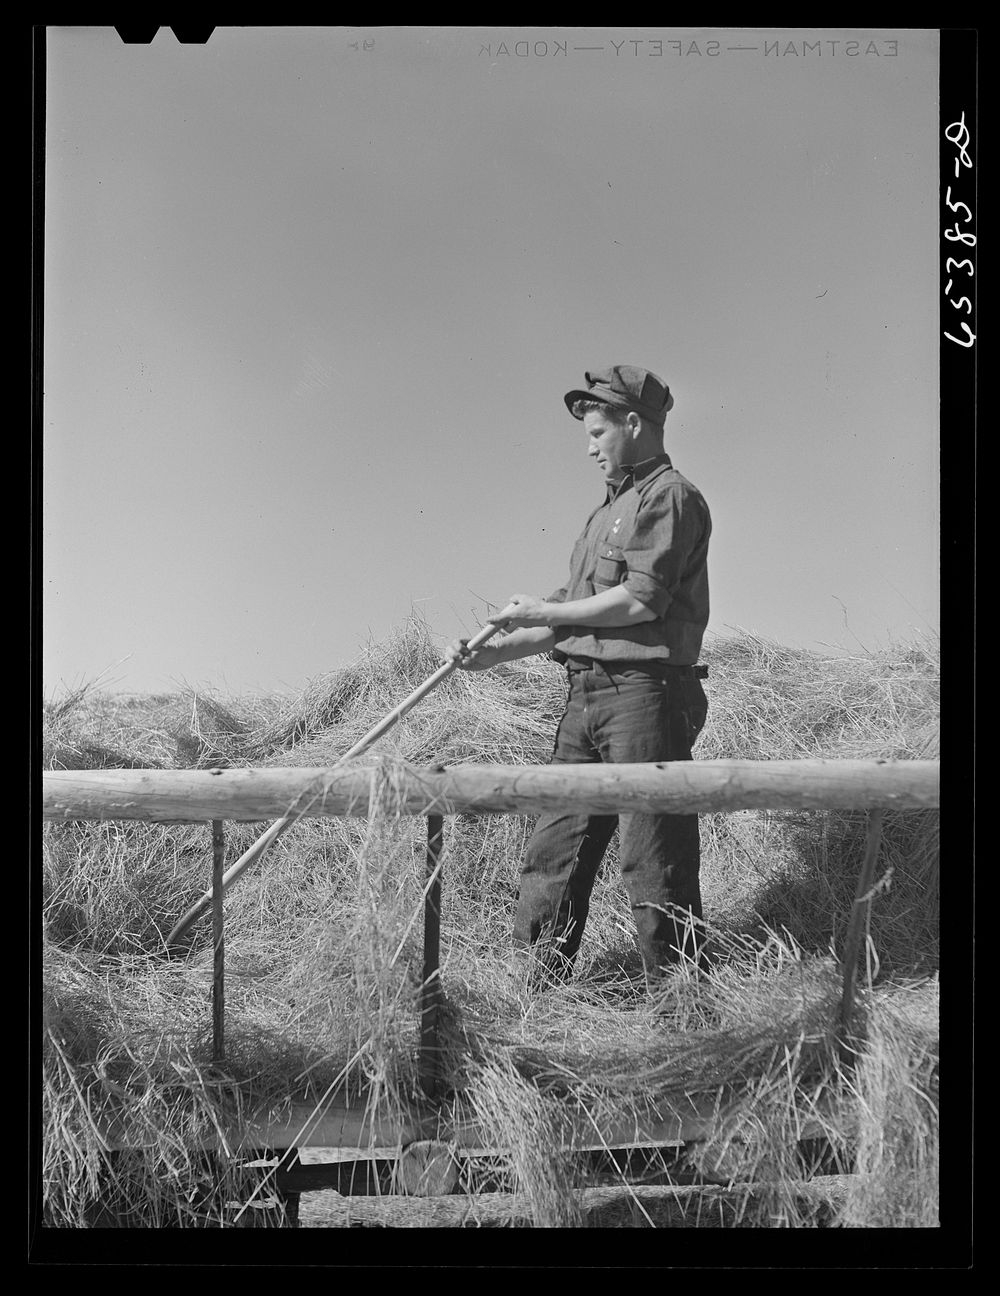 [Untitled photo, possibly related to: Beaverhead County, Montana. Loading hay wagon for cattle feeding, Spokane Ranch].…